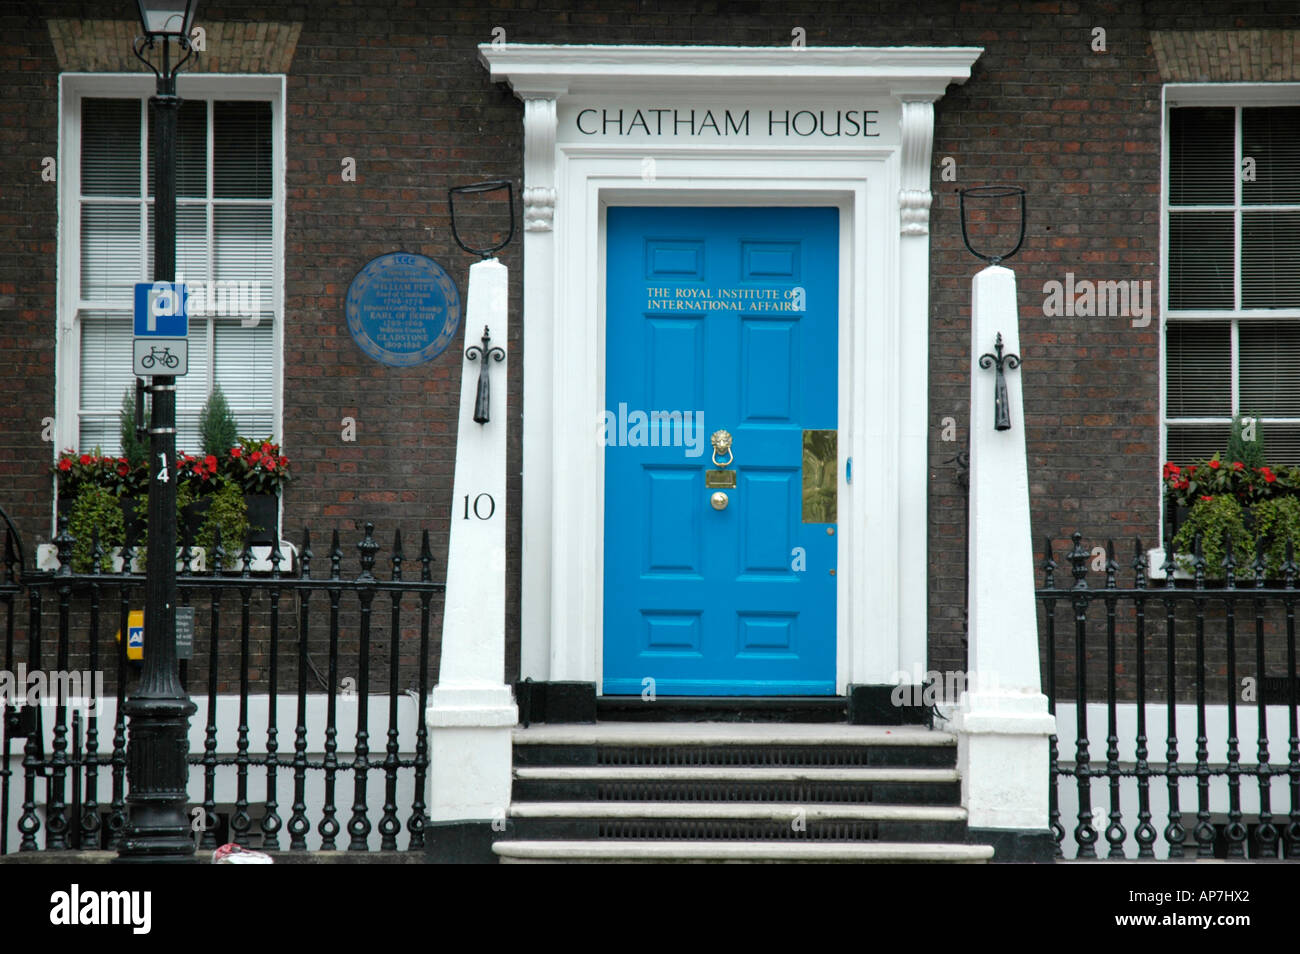 Il Royal Institute of International Affairs Chatham House St James's Square London REGNO UNITO Foto Stock